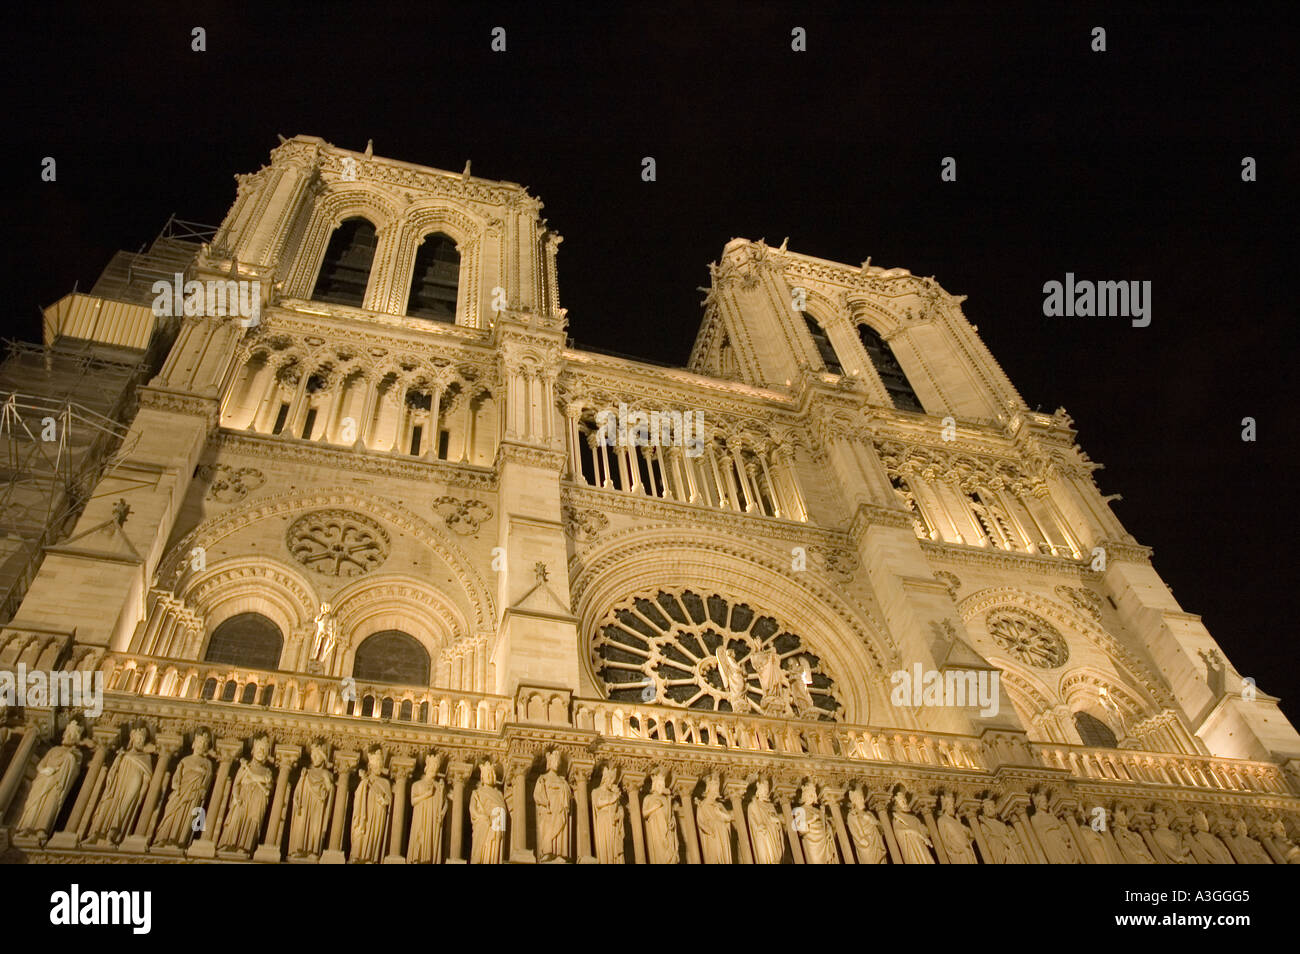 looking up at Notre Dame Cathedral in Paris France prior to the devastating April 15, 2019 fire. Stock Photo